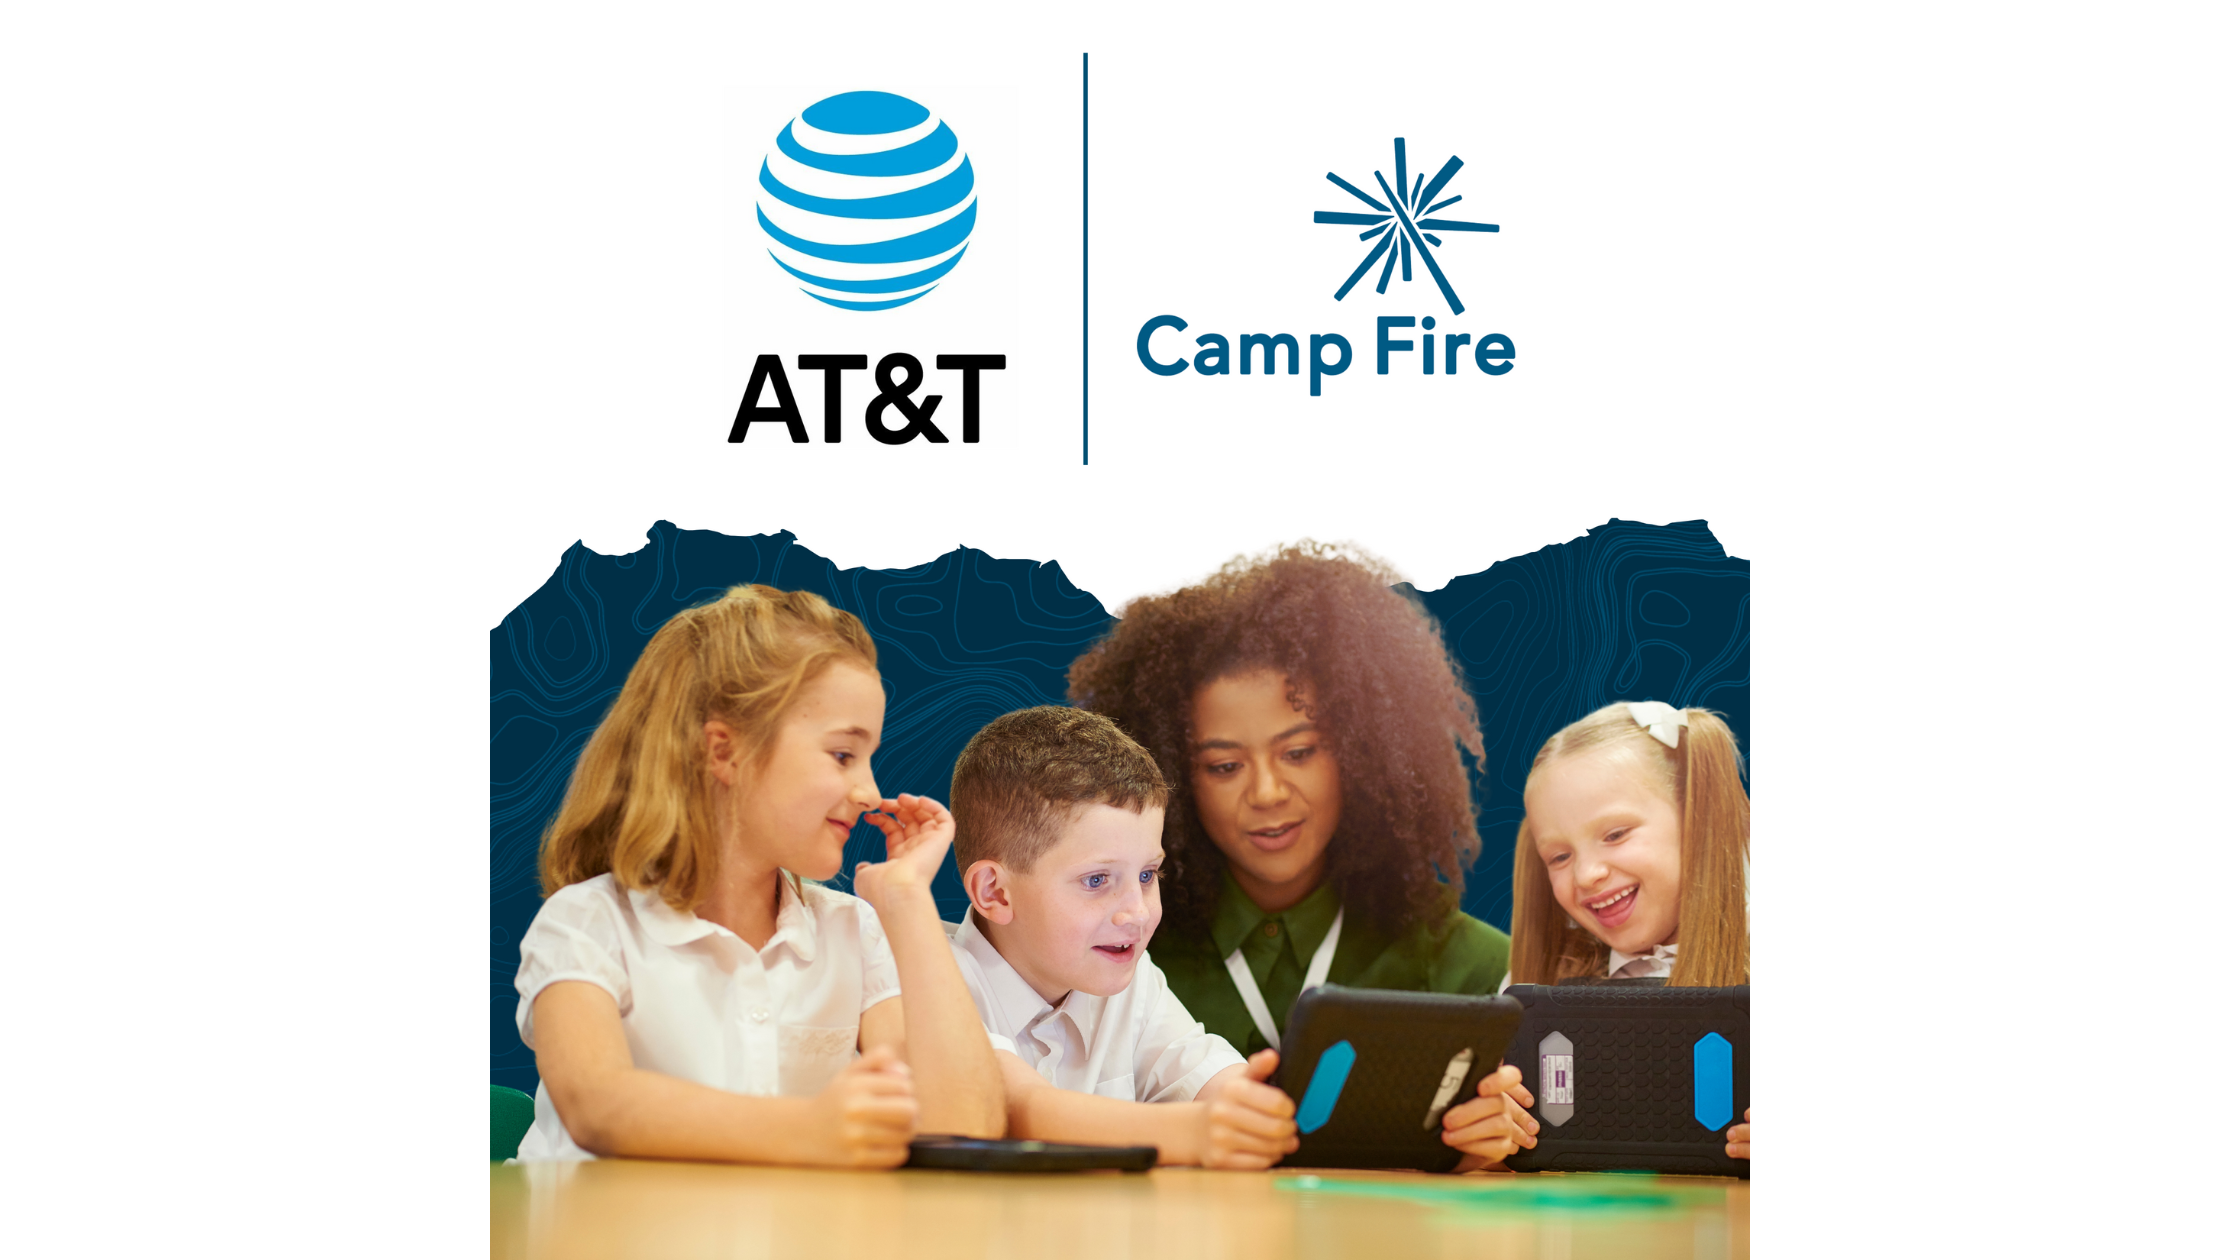 AT&T logo and Camp Fire logo above youth and adult looking at a laptop